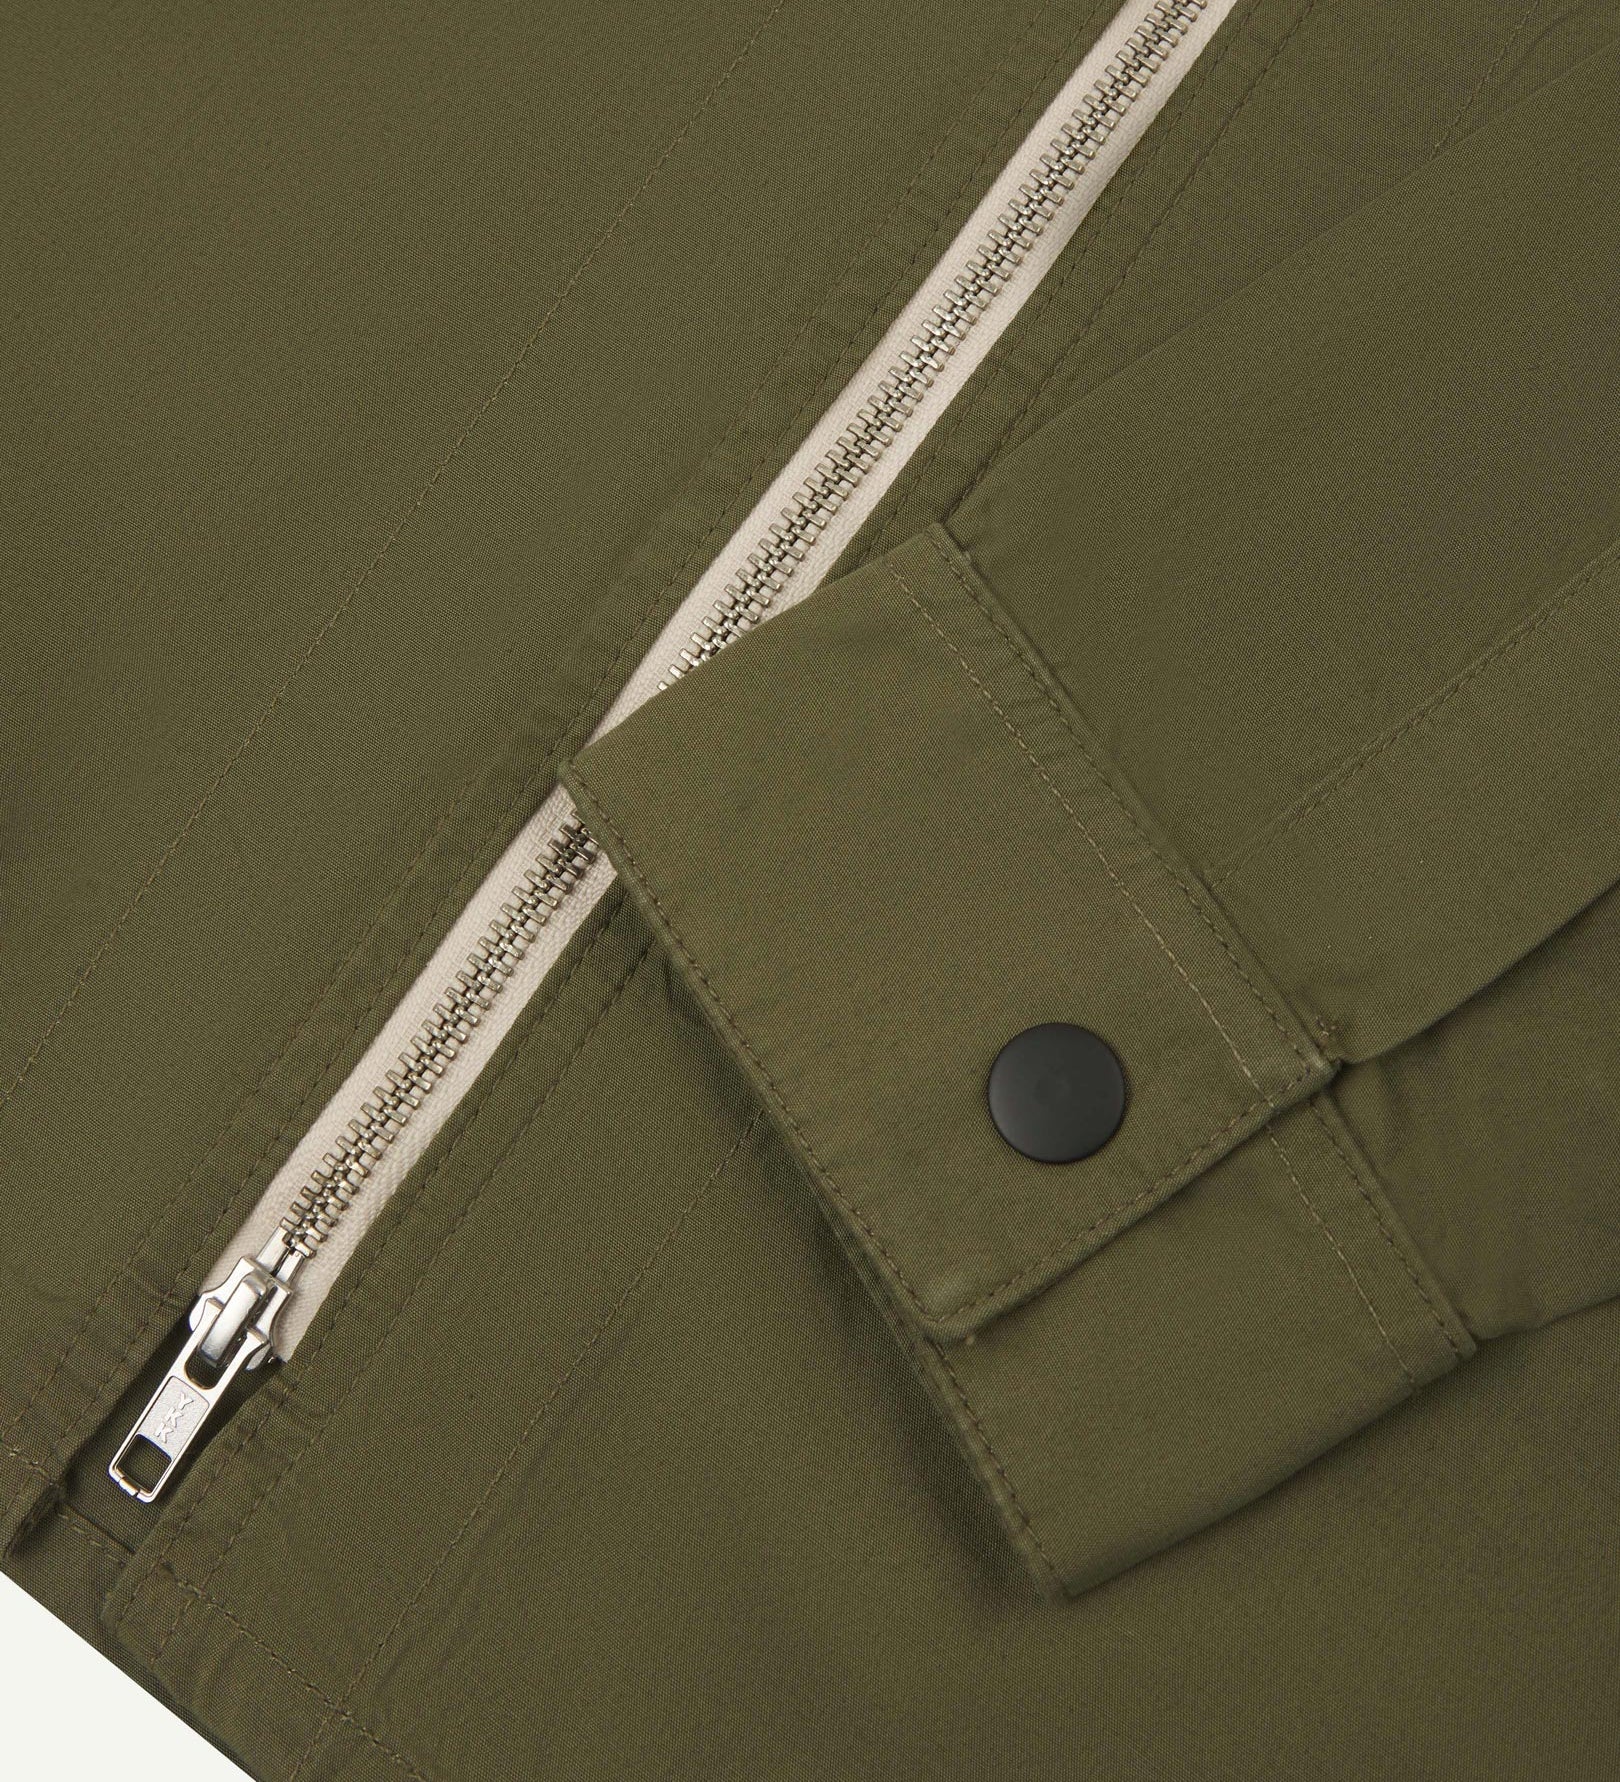 View of the mid-section of the olive-green 6002 lightweight jacket from Uskees, with focus on the cuff and front zipper detail.